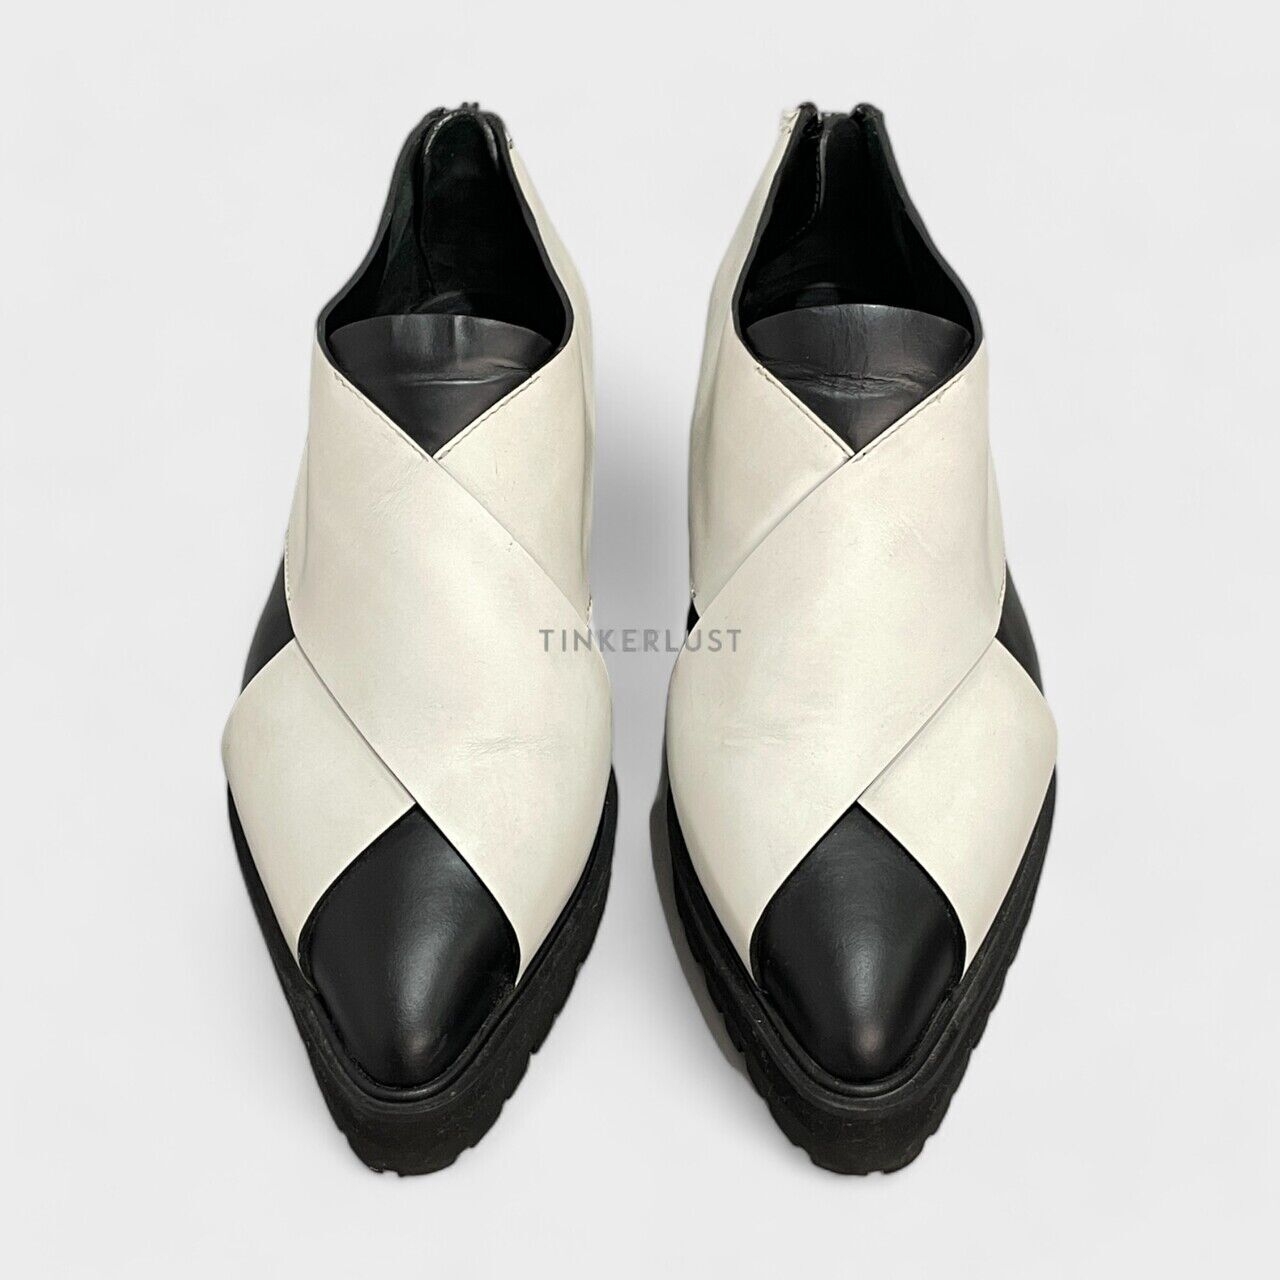 Proenza Schouler Black & White Leather Colorblock Pattern Loafers